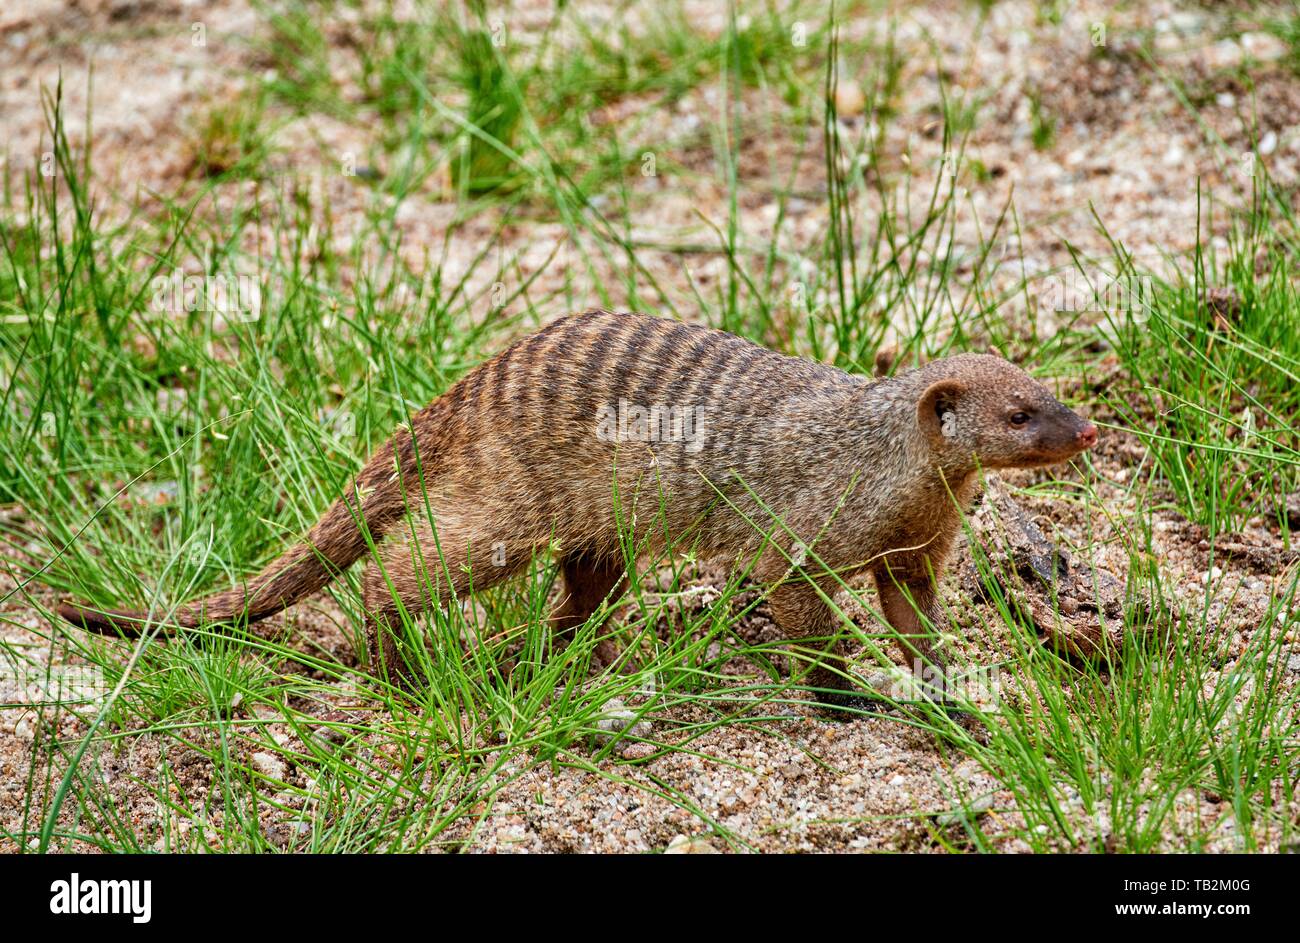 banded mongoose Stock Photo